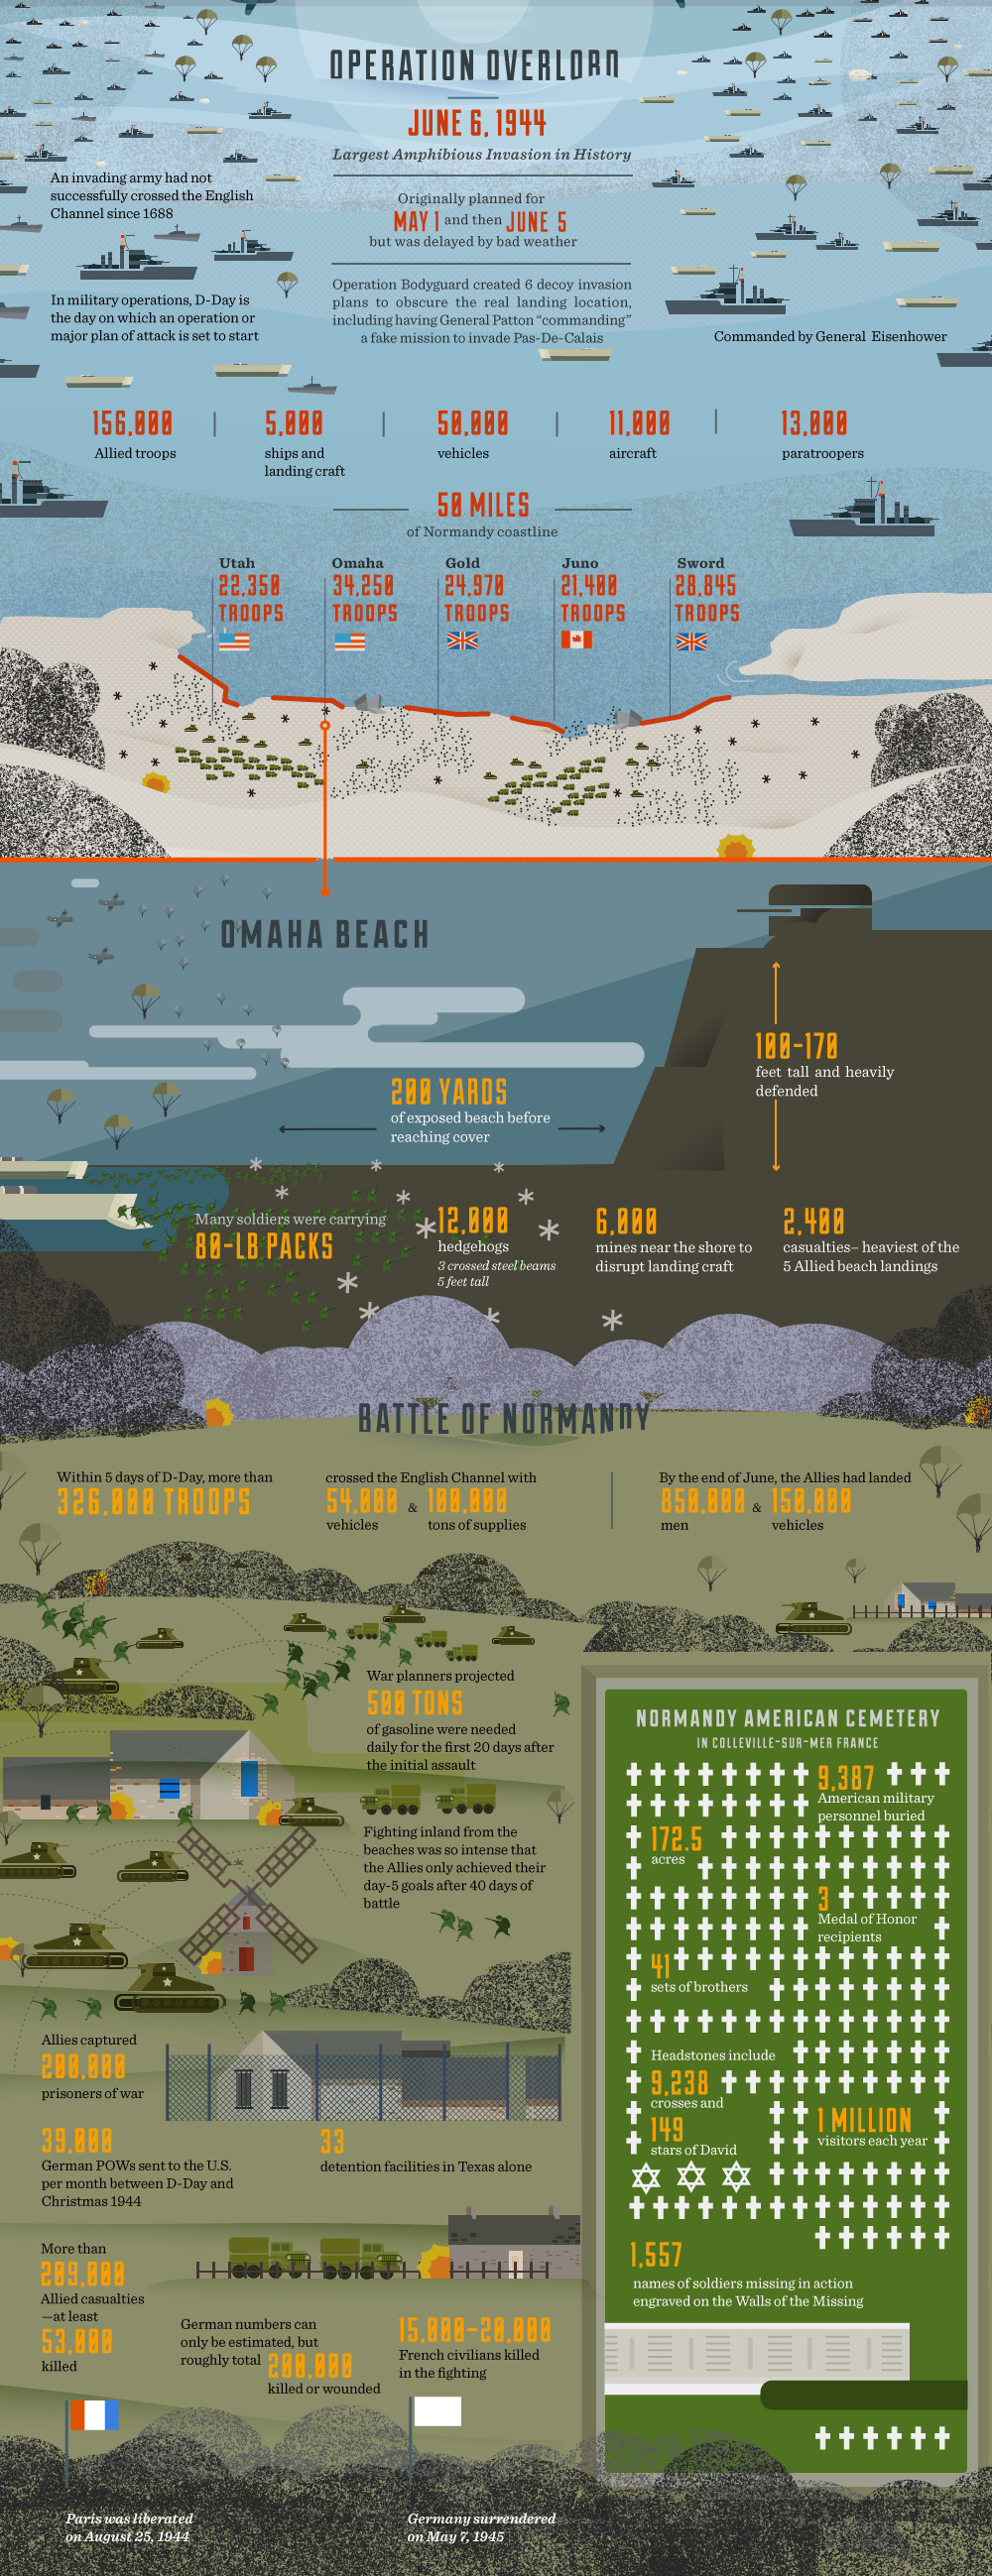 D-Day-infographic